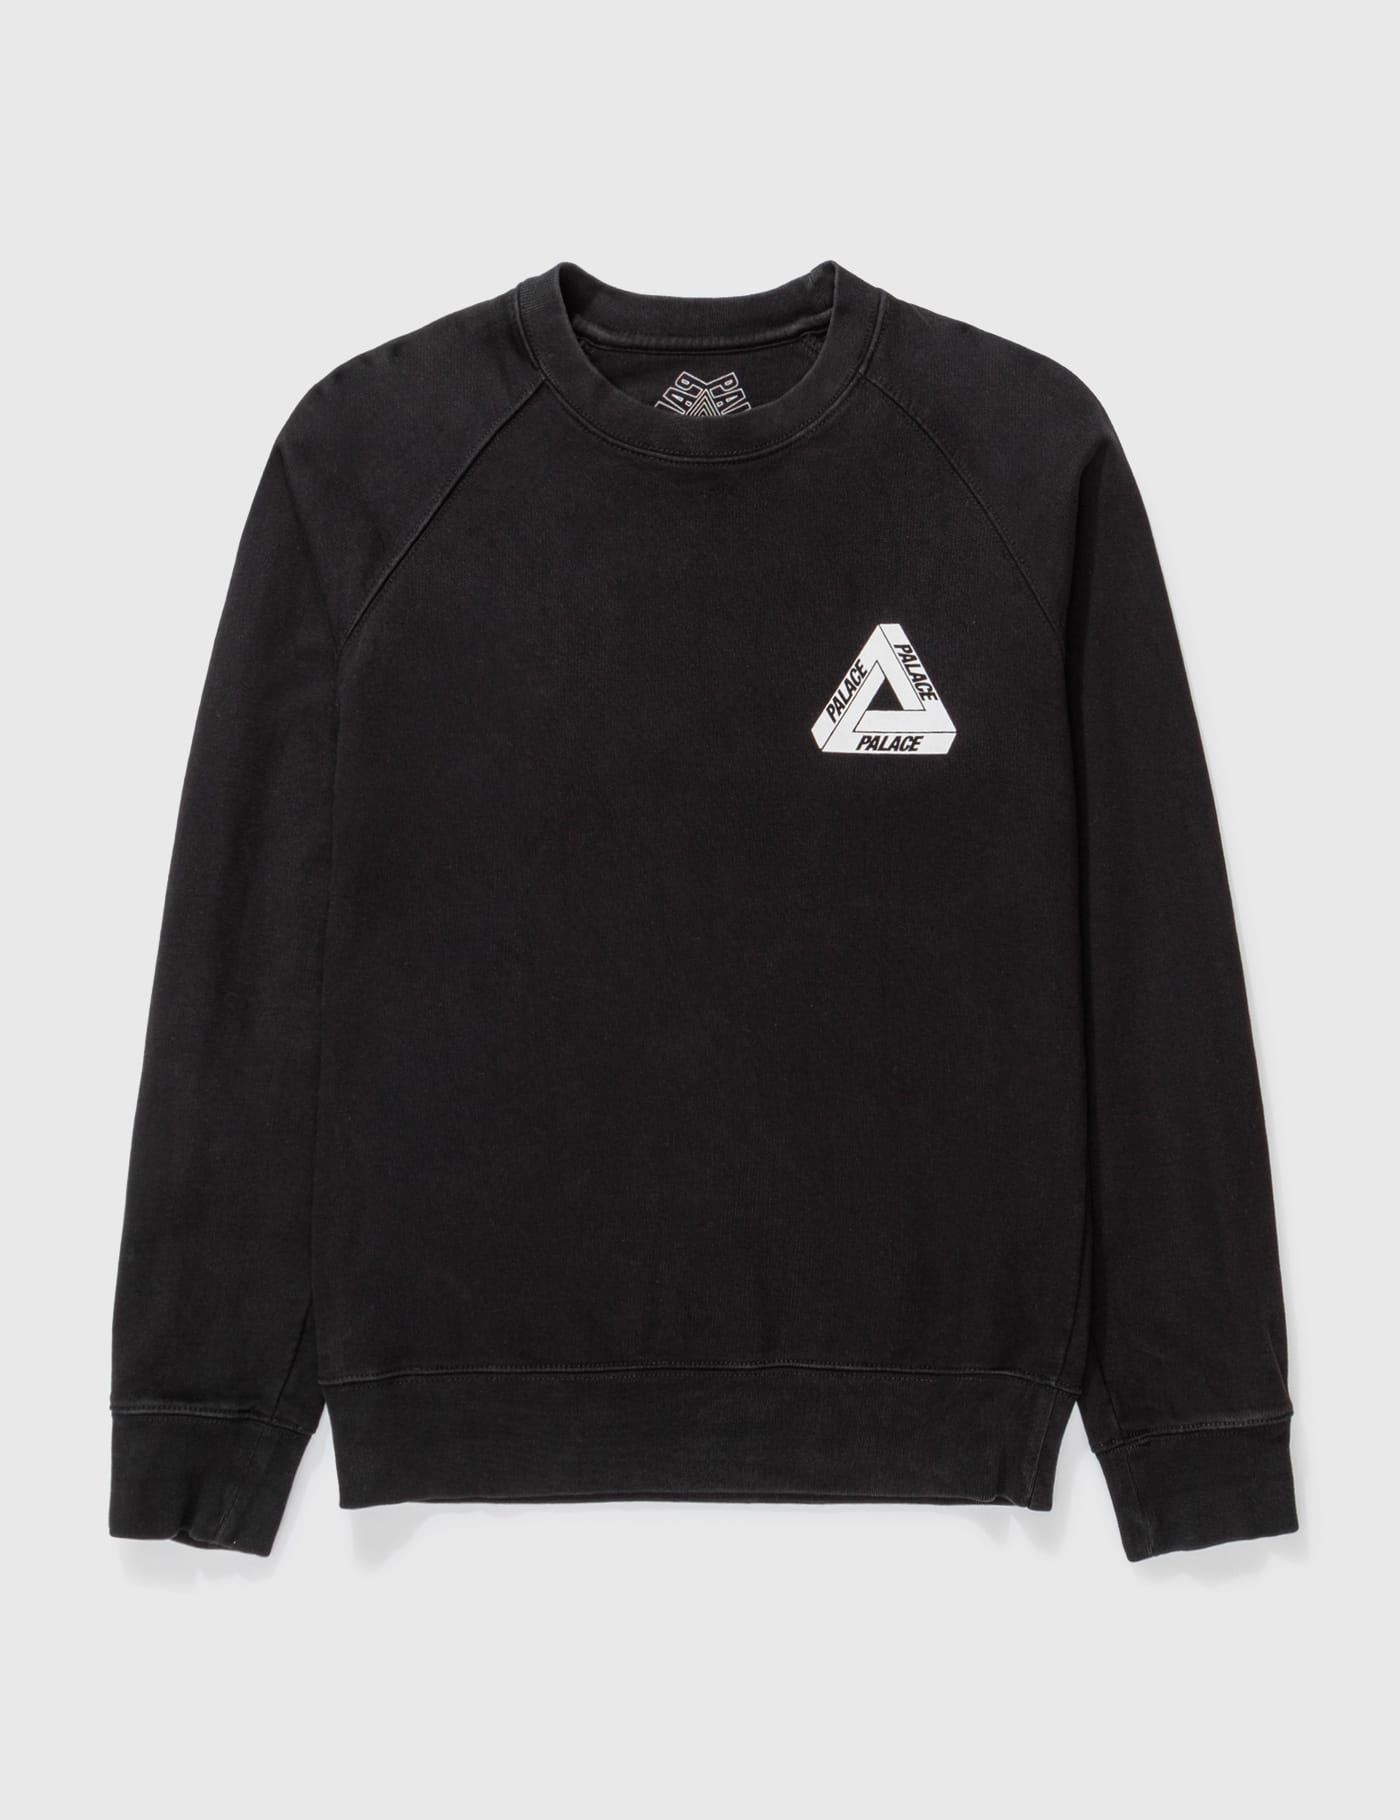 Palace Skateboards | HBX - Globally Curated Fashion and Lifestyle 